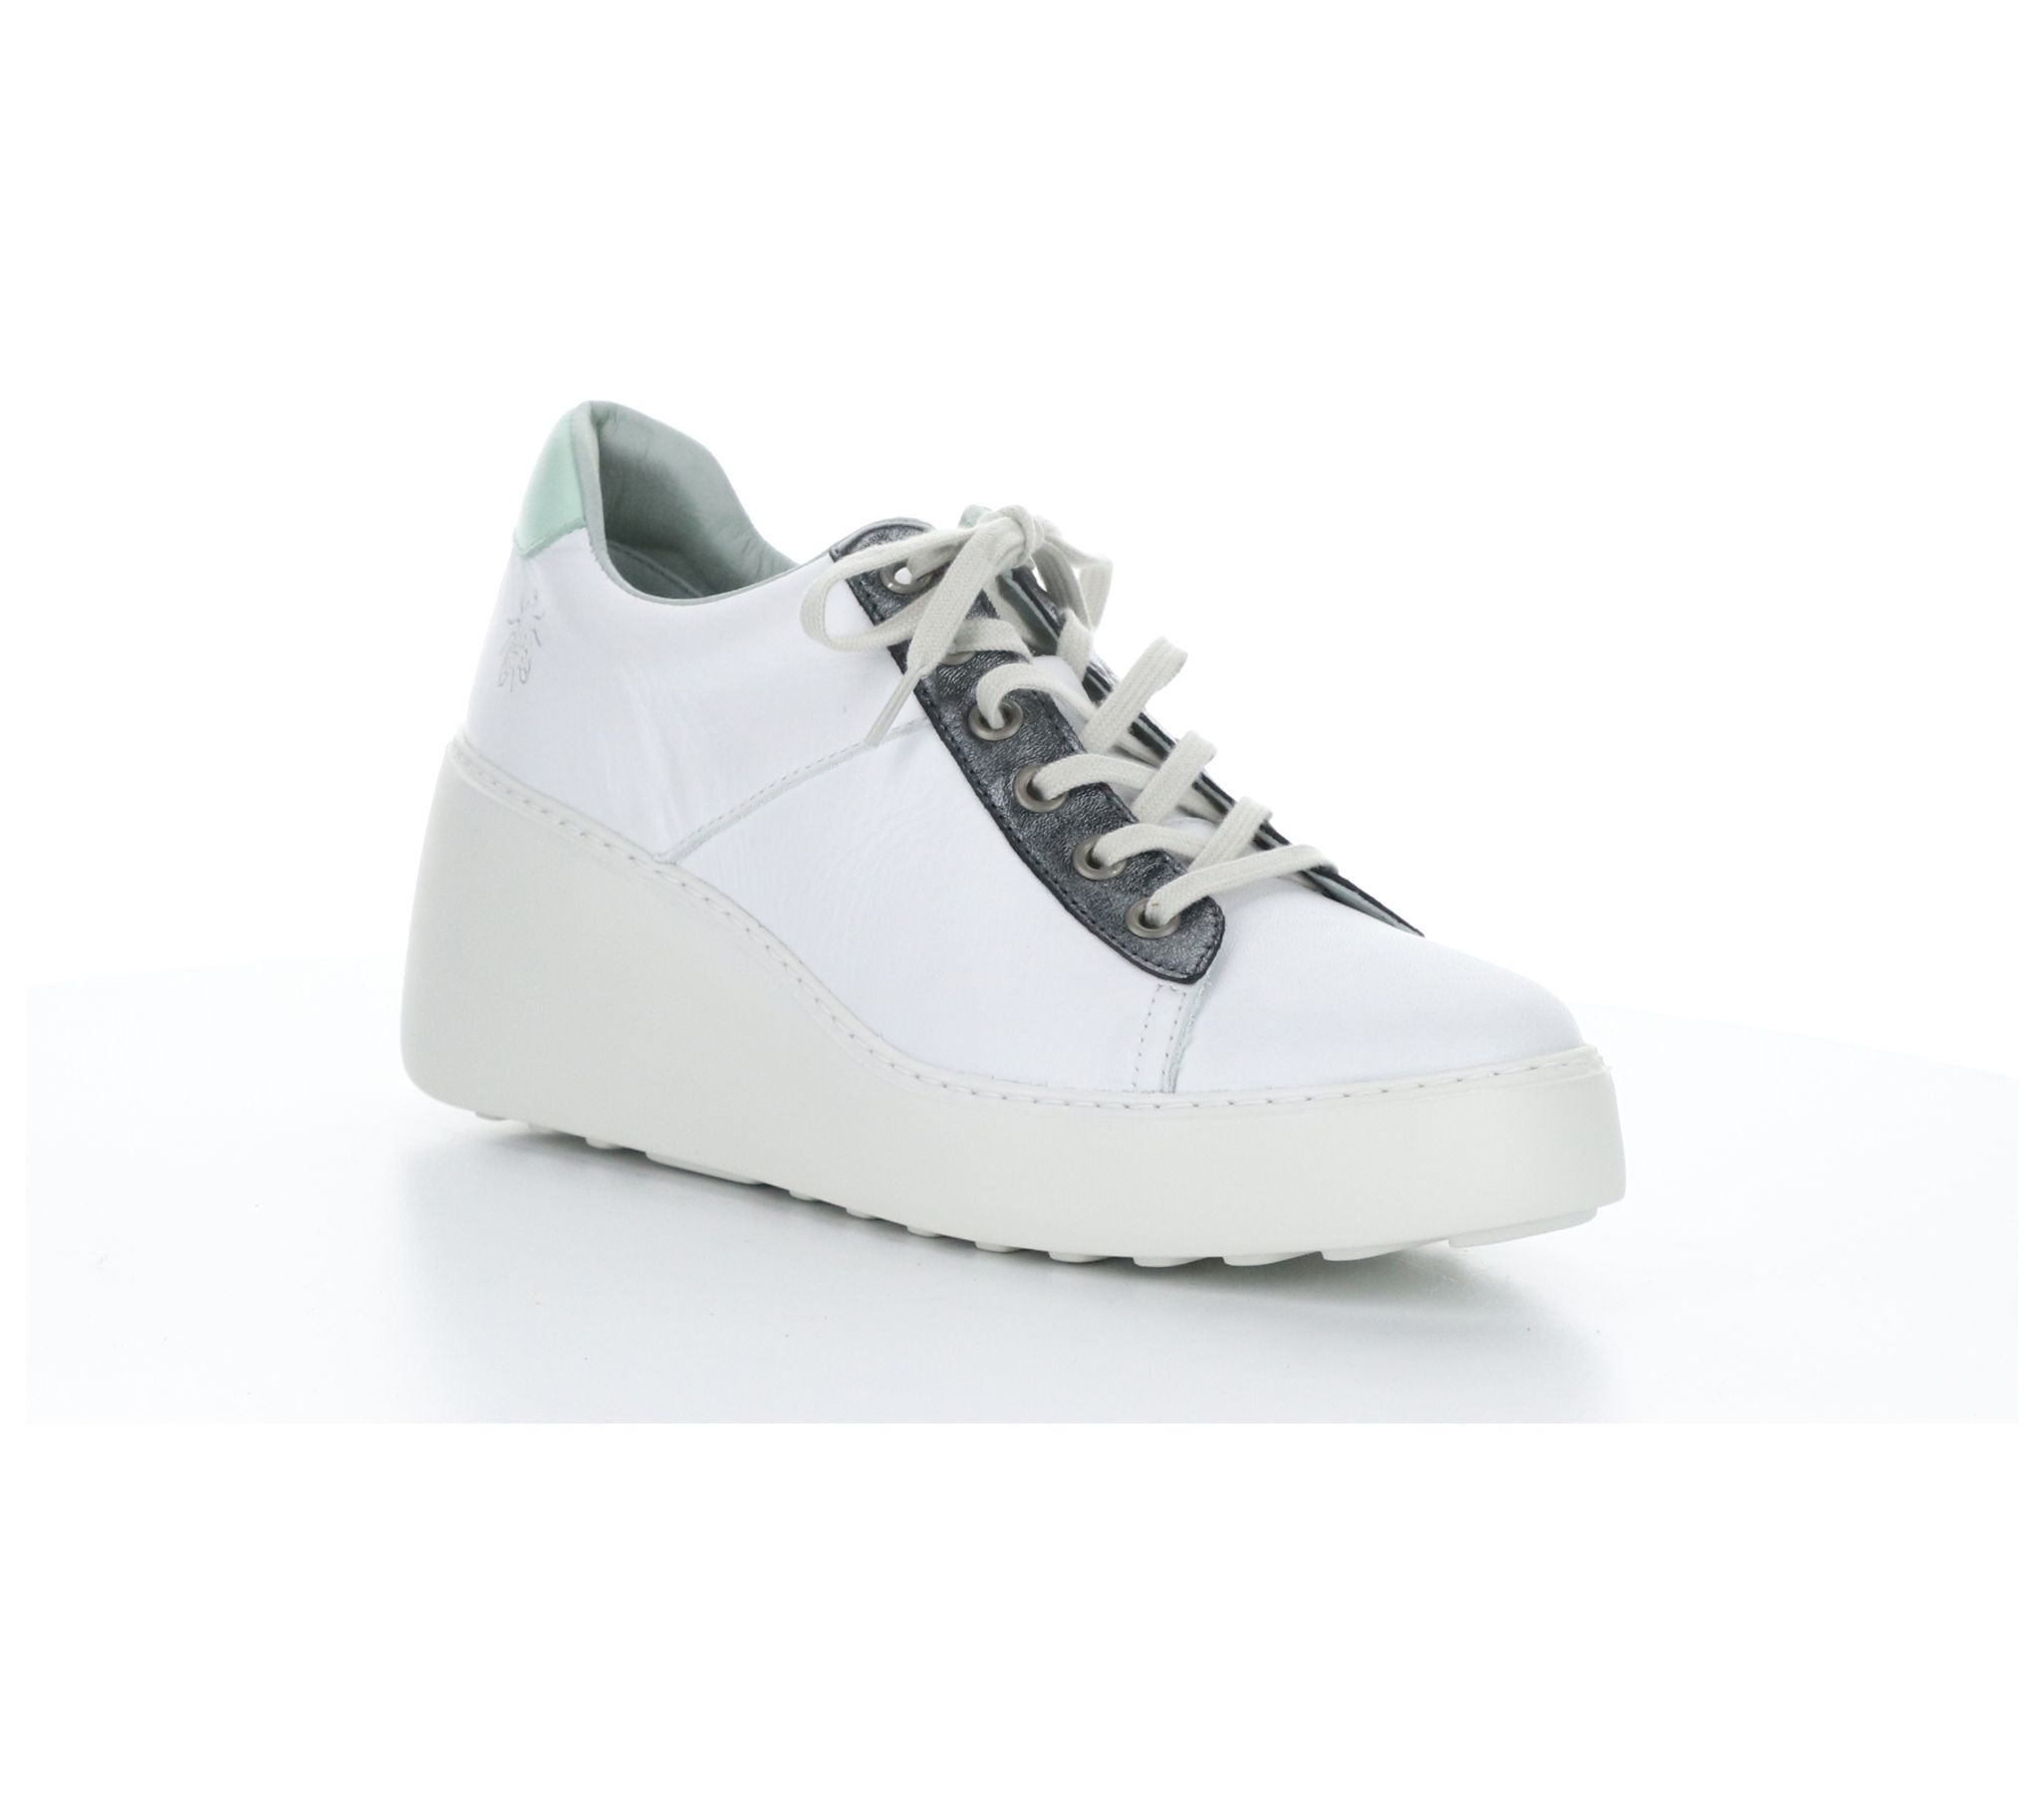 Fly London - Women's Shoes 8 1/2 M - Sneakers & Athletic 